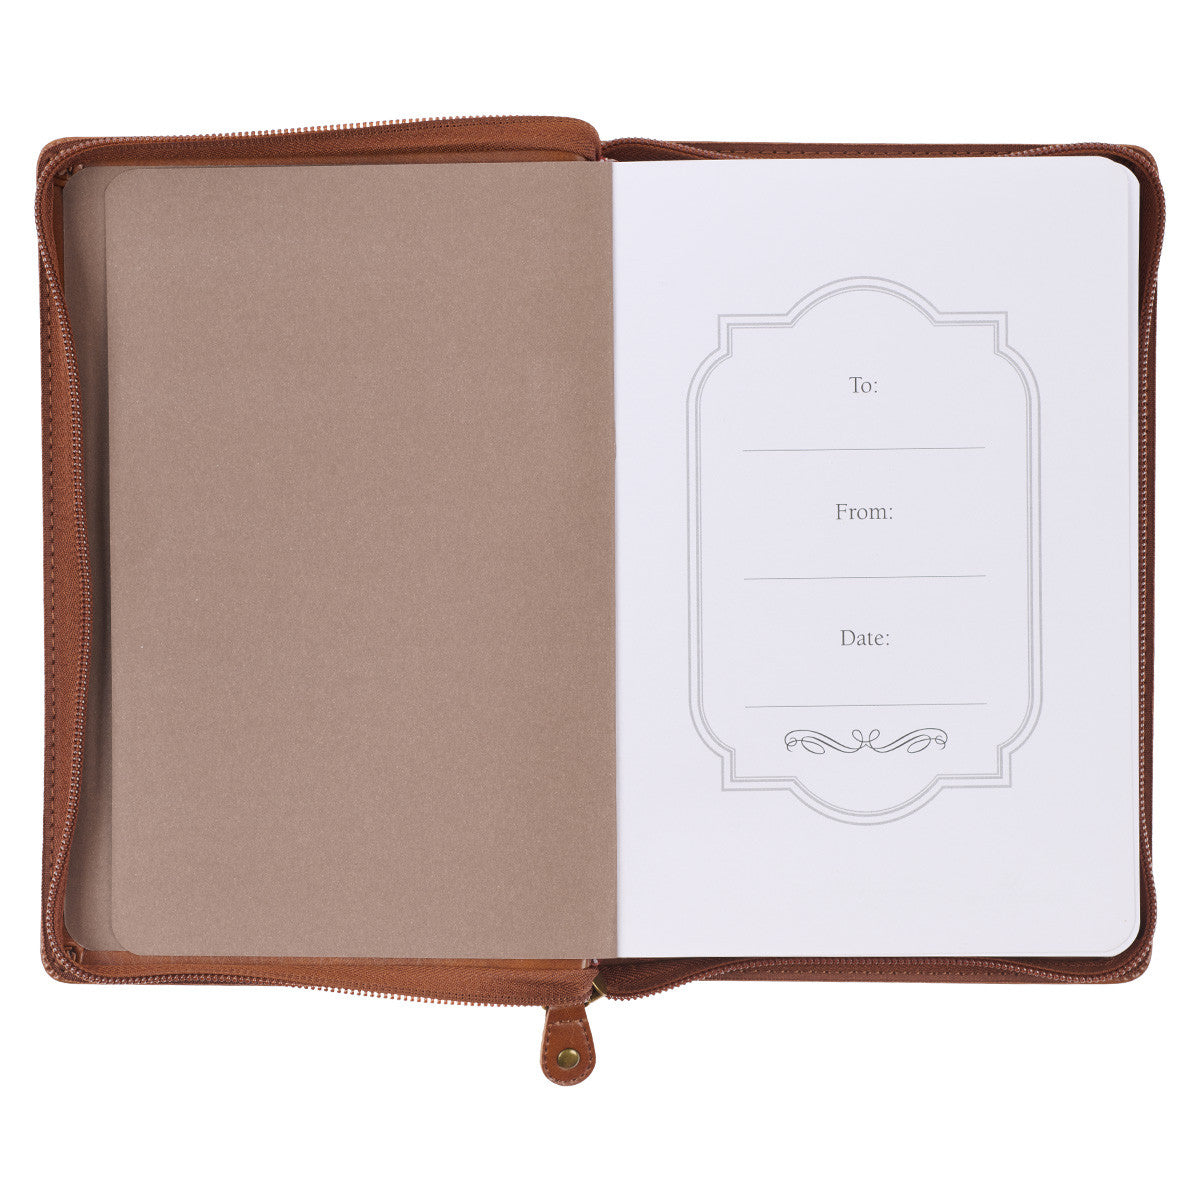 Be Strong Toffee Brown Faux Leather Classic Journal with Zippered Closure - Joshua 1:9 - The Christian Gift Company